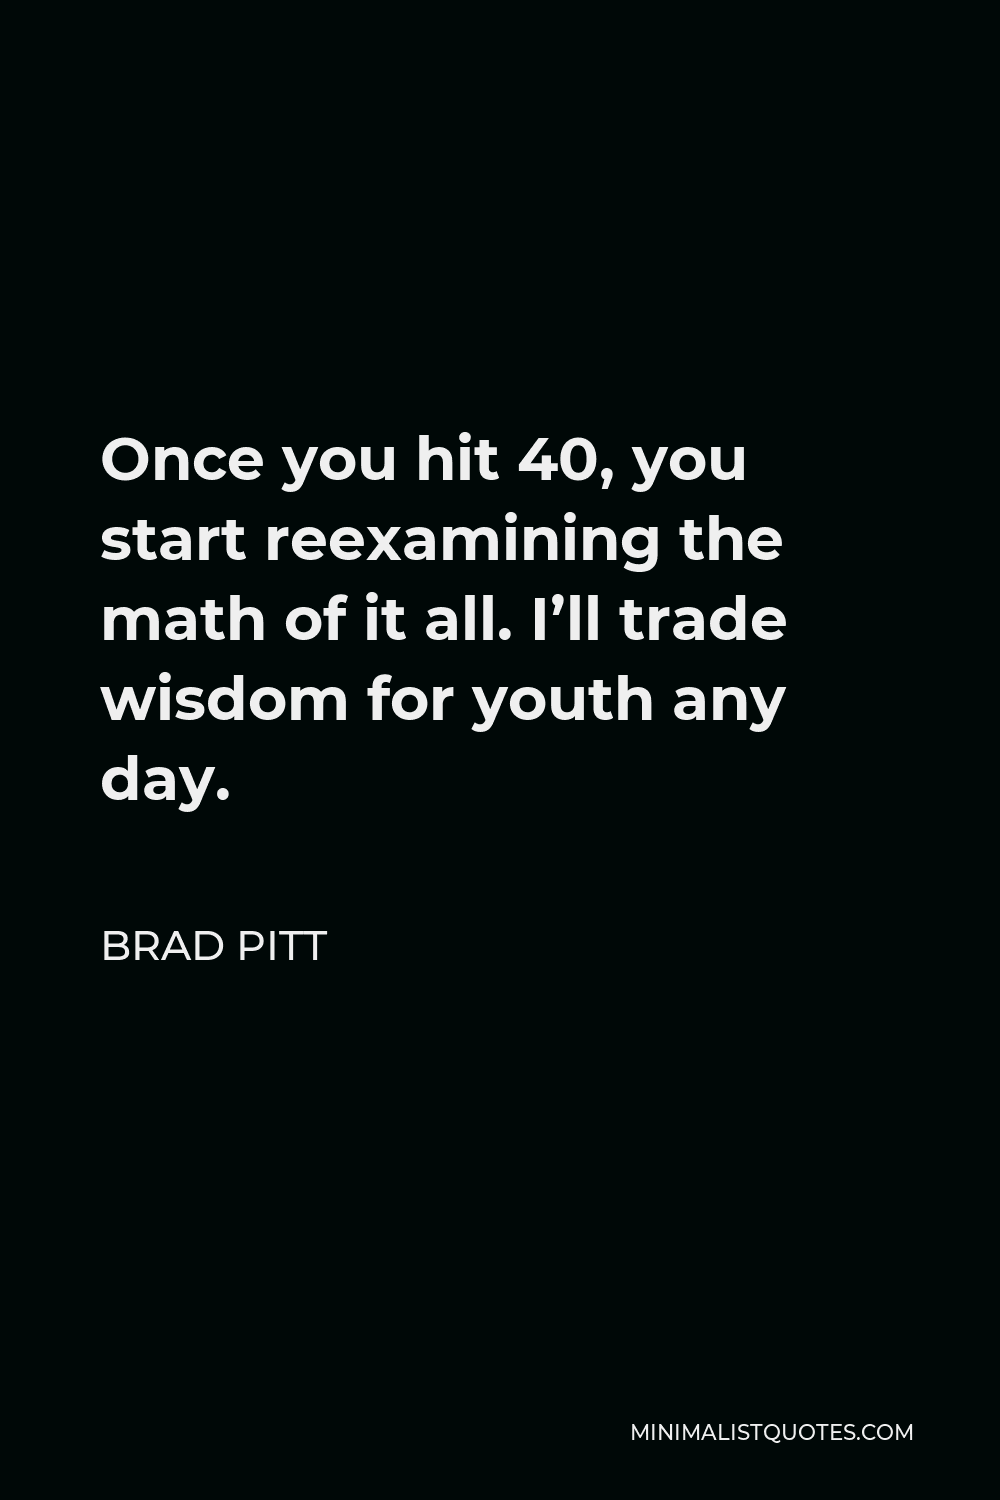 Brad Pitt Quote - Once you hit 40, you start reexamining the math of it all. I’ll trade wisdom for youth any day.